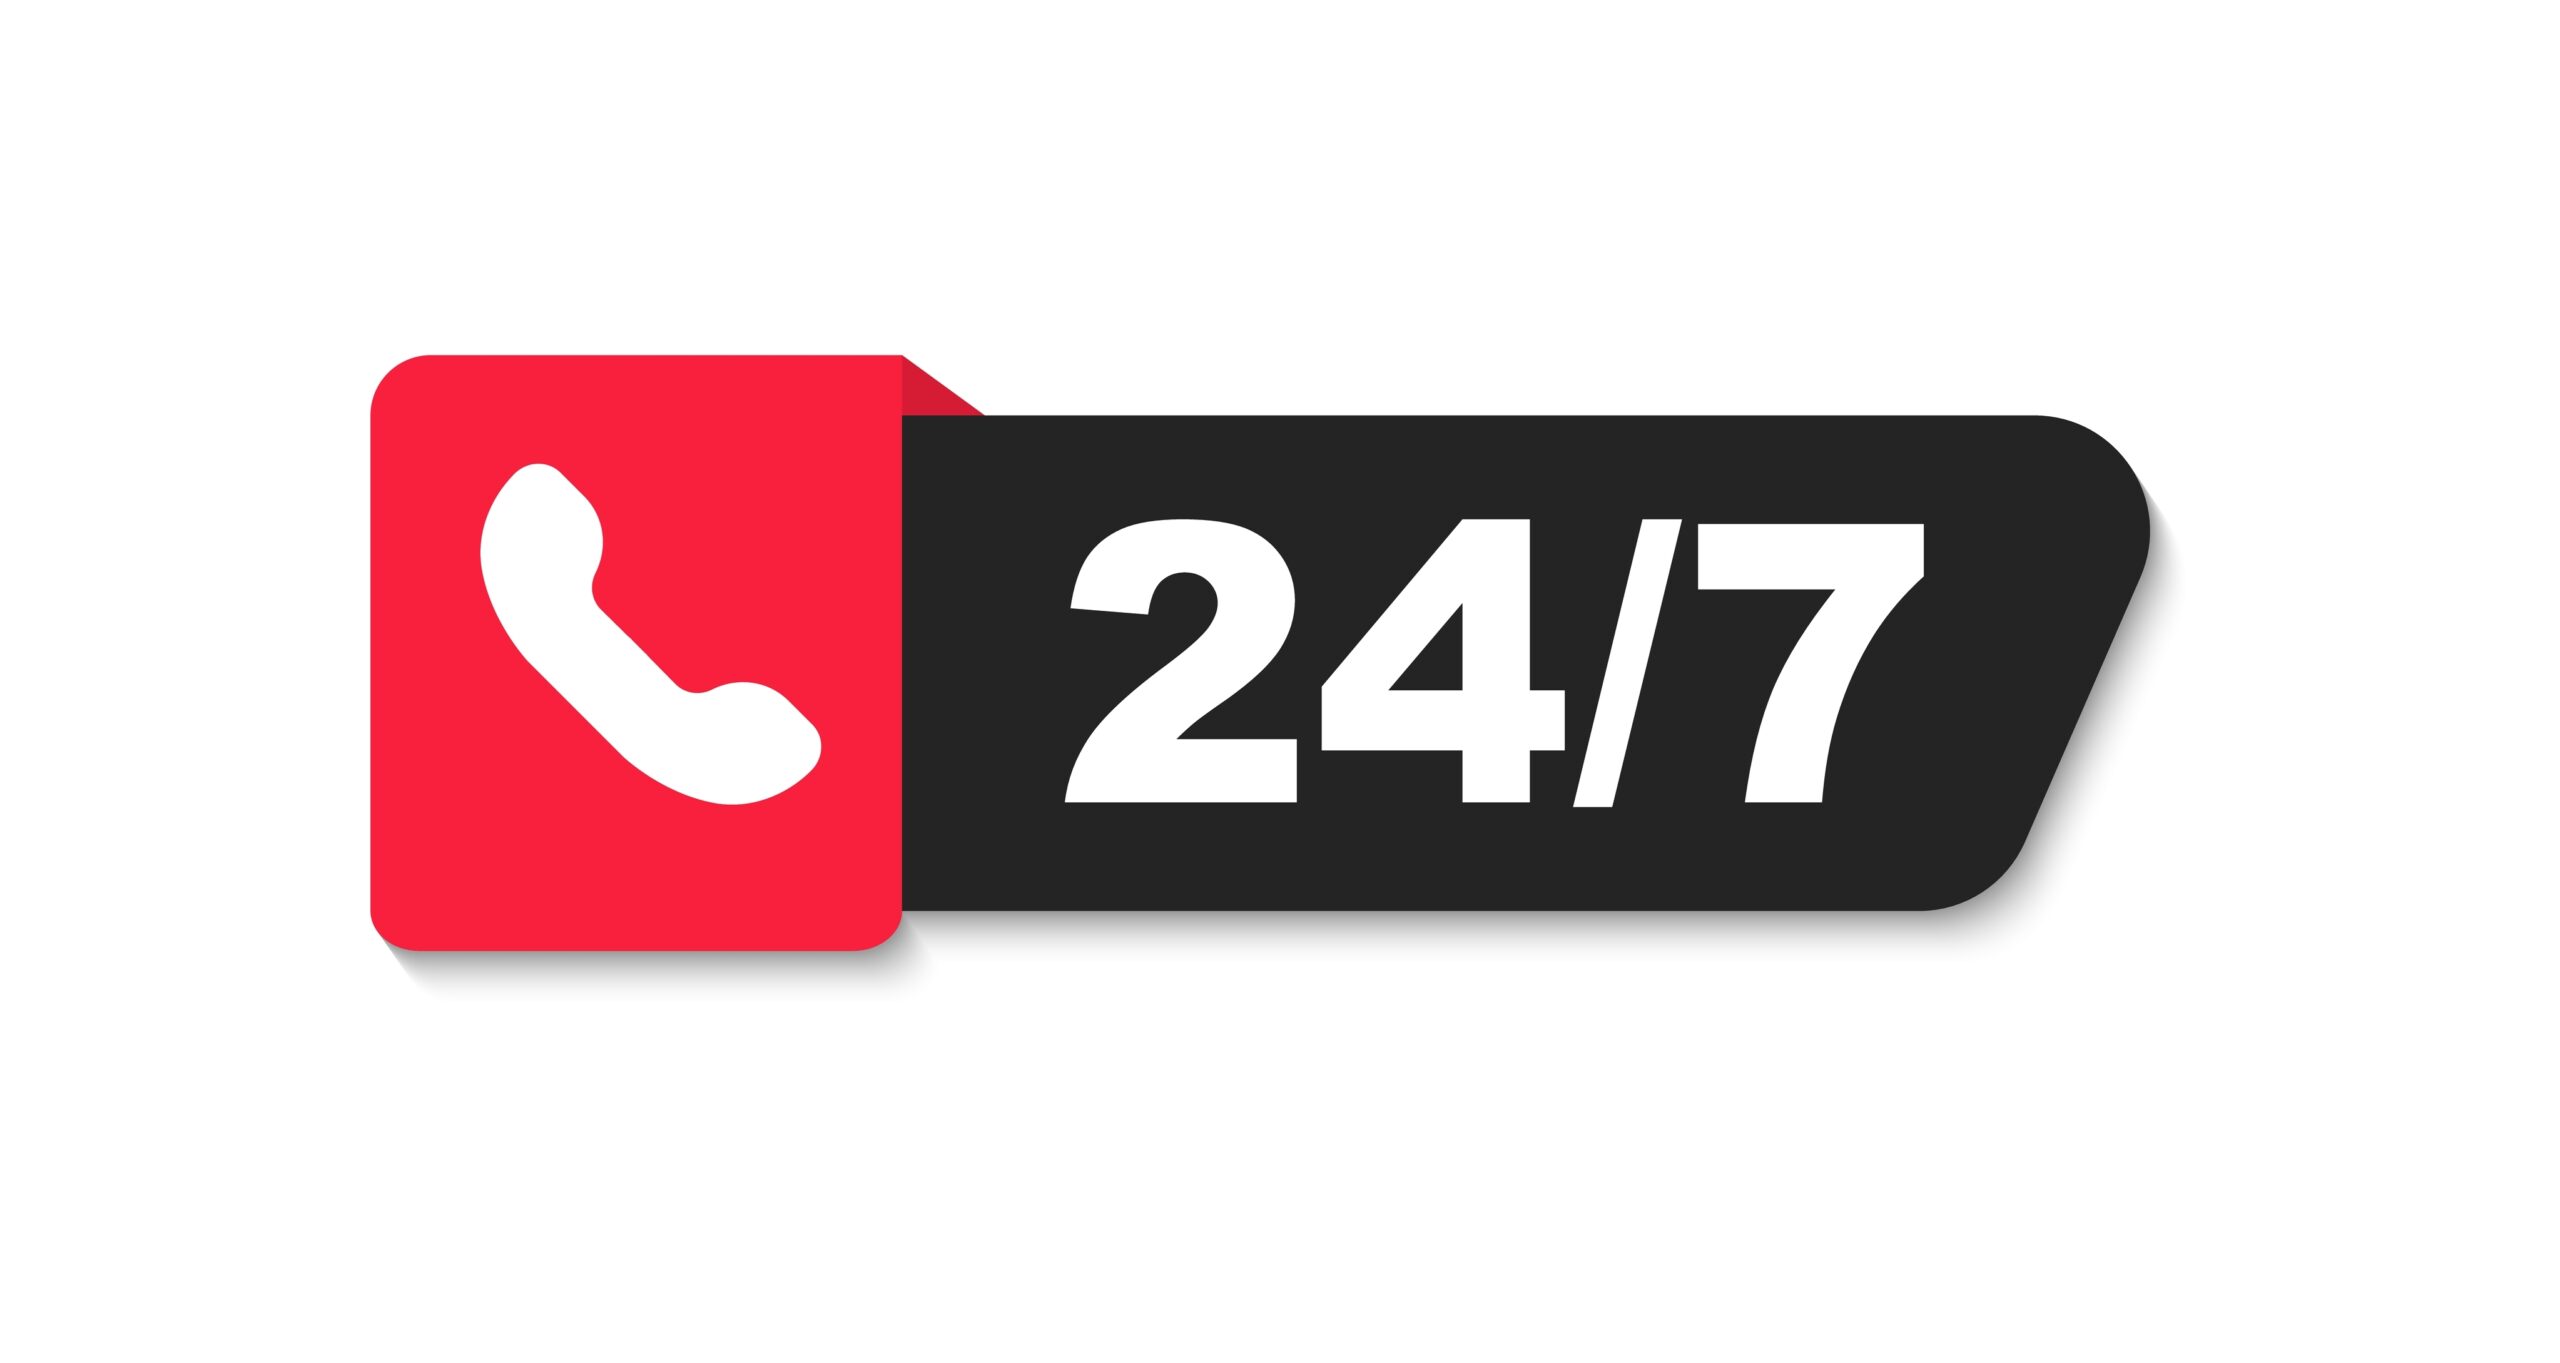 Red and black 24/7 icon with a white phone symbol on the left side.